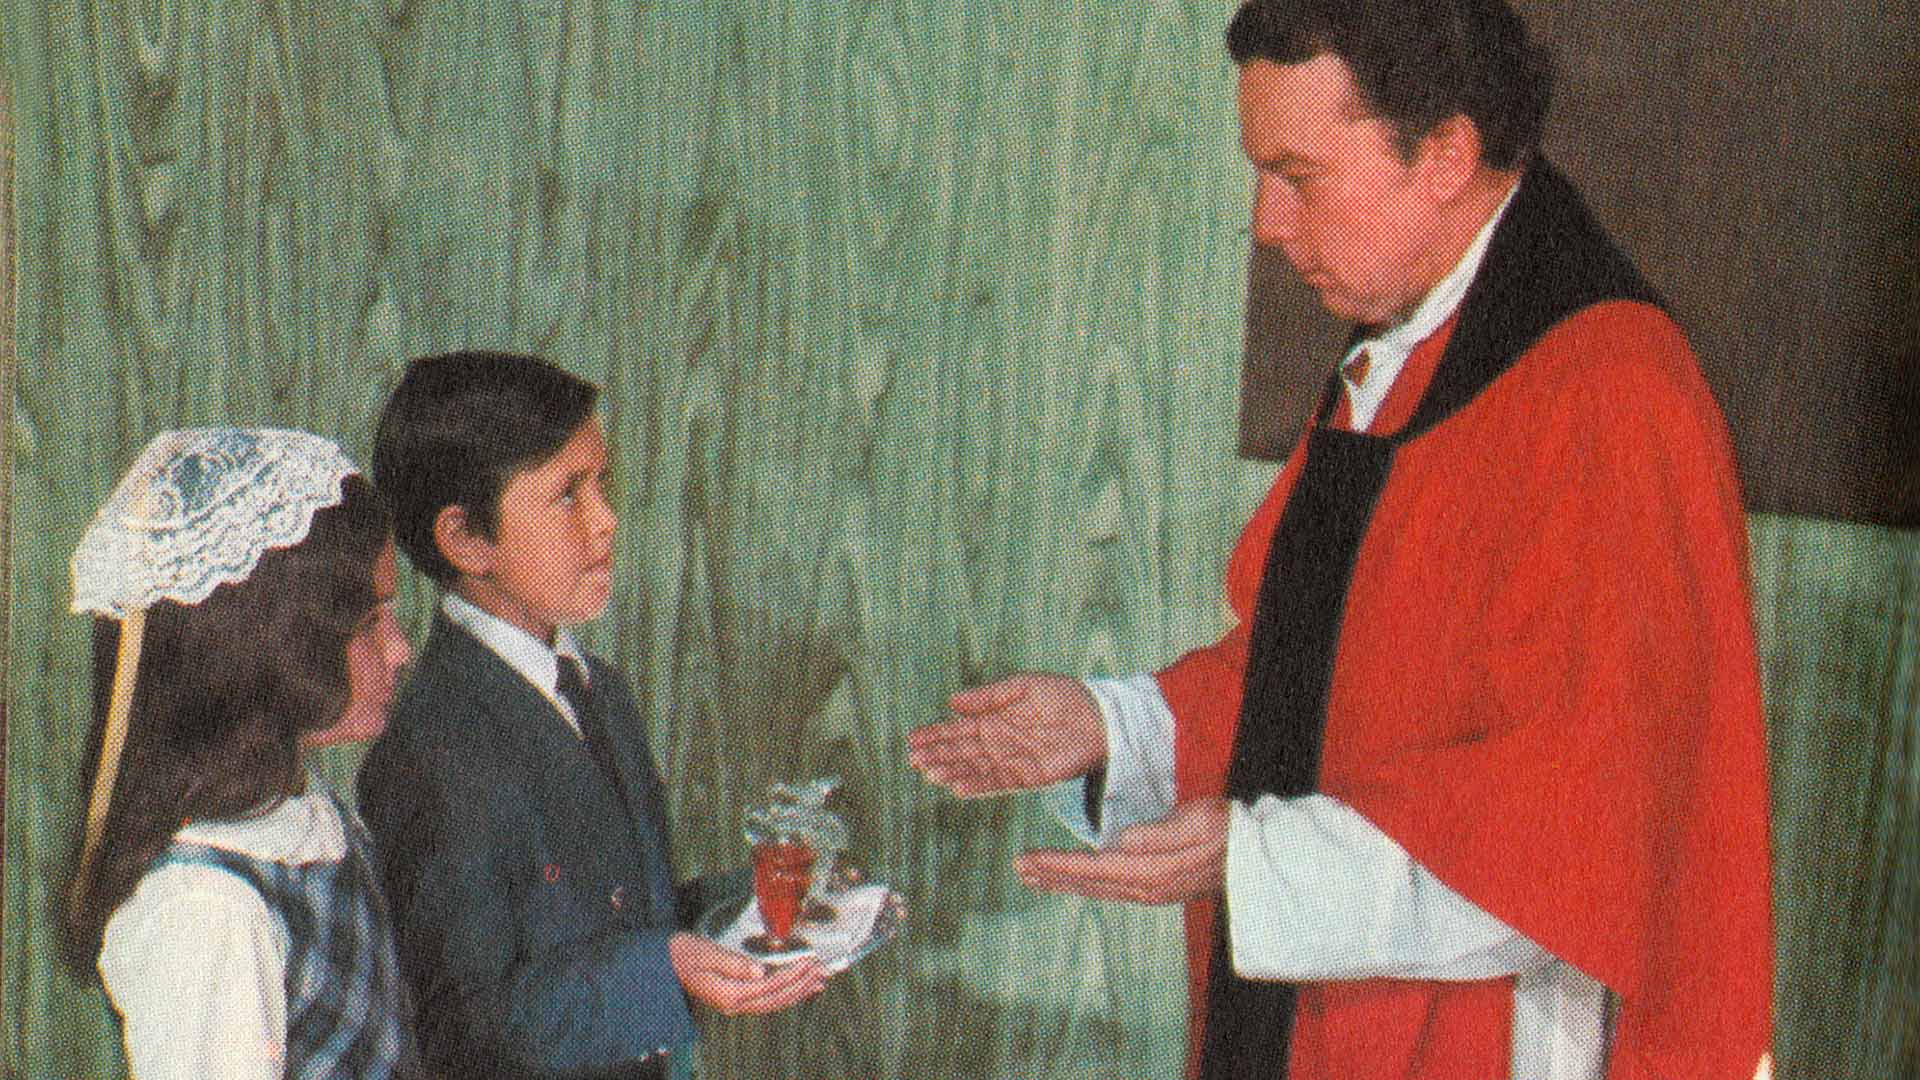 Priest giving children communion | Growing Up As a Reluctant Catholic